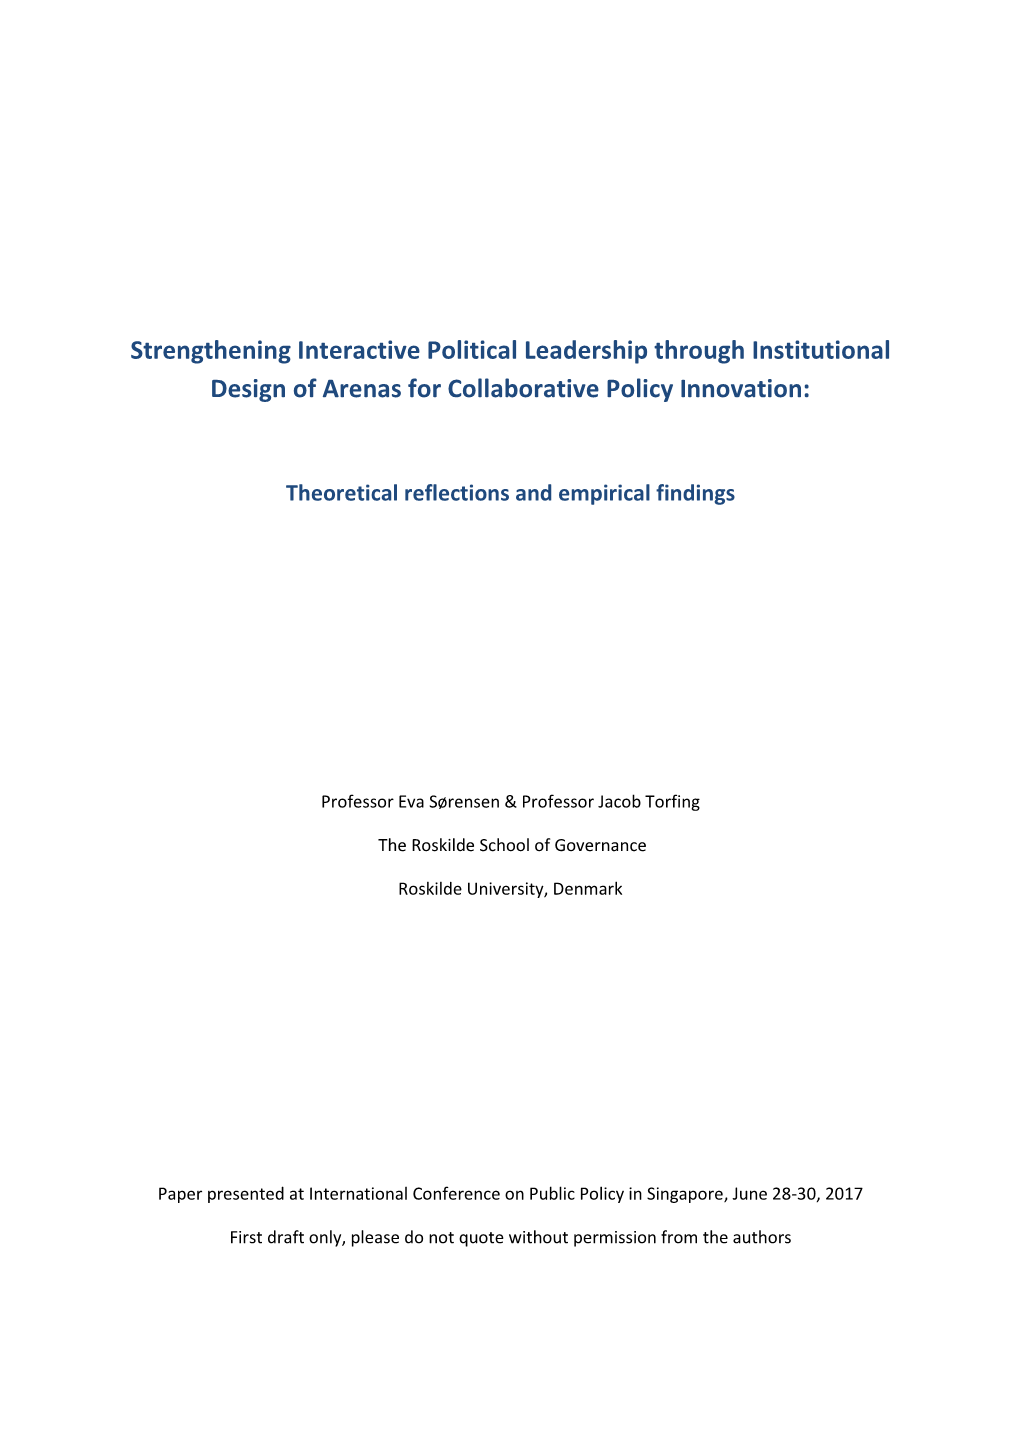 Strengthening Interactive Political Leadership Through Institutional Design of Arenas for Collaborative Policy Innovation